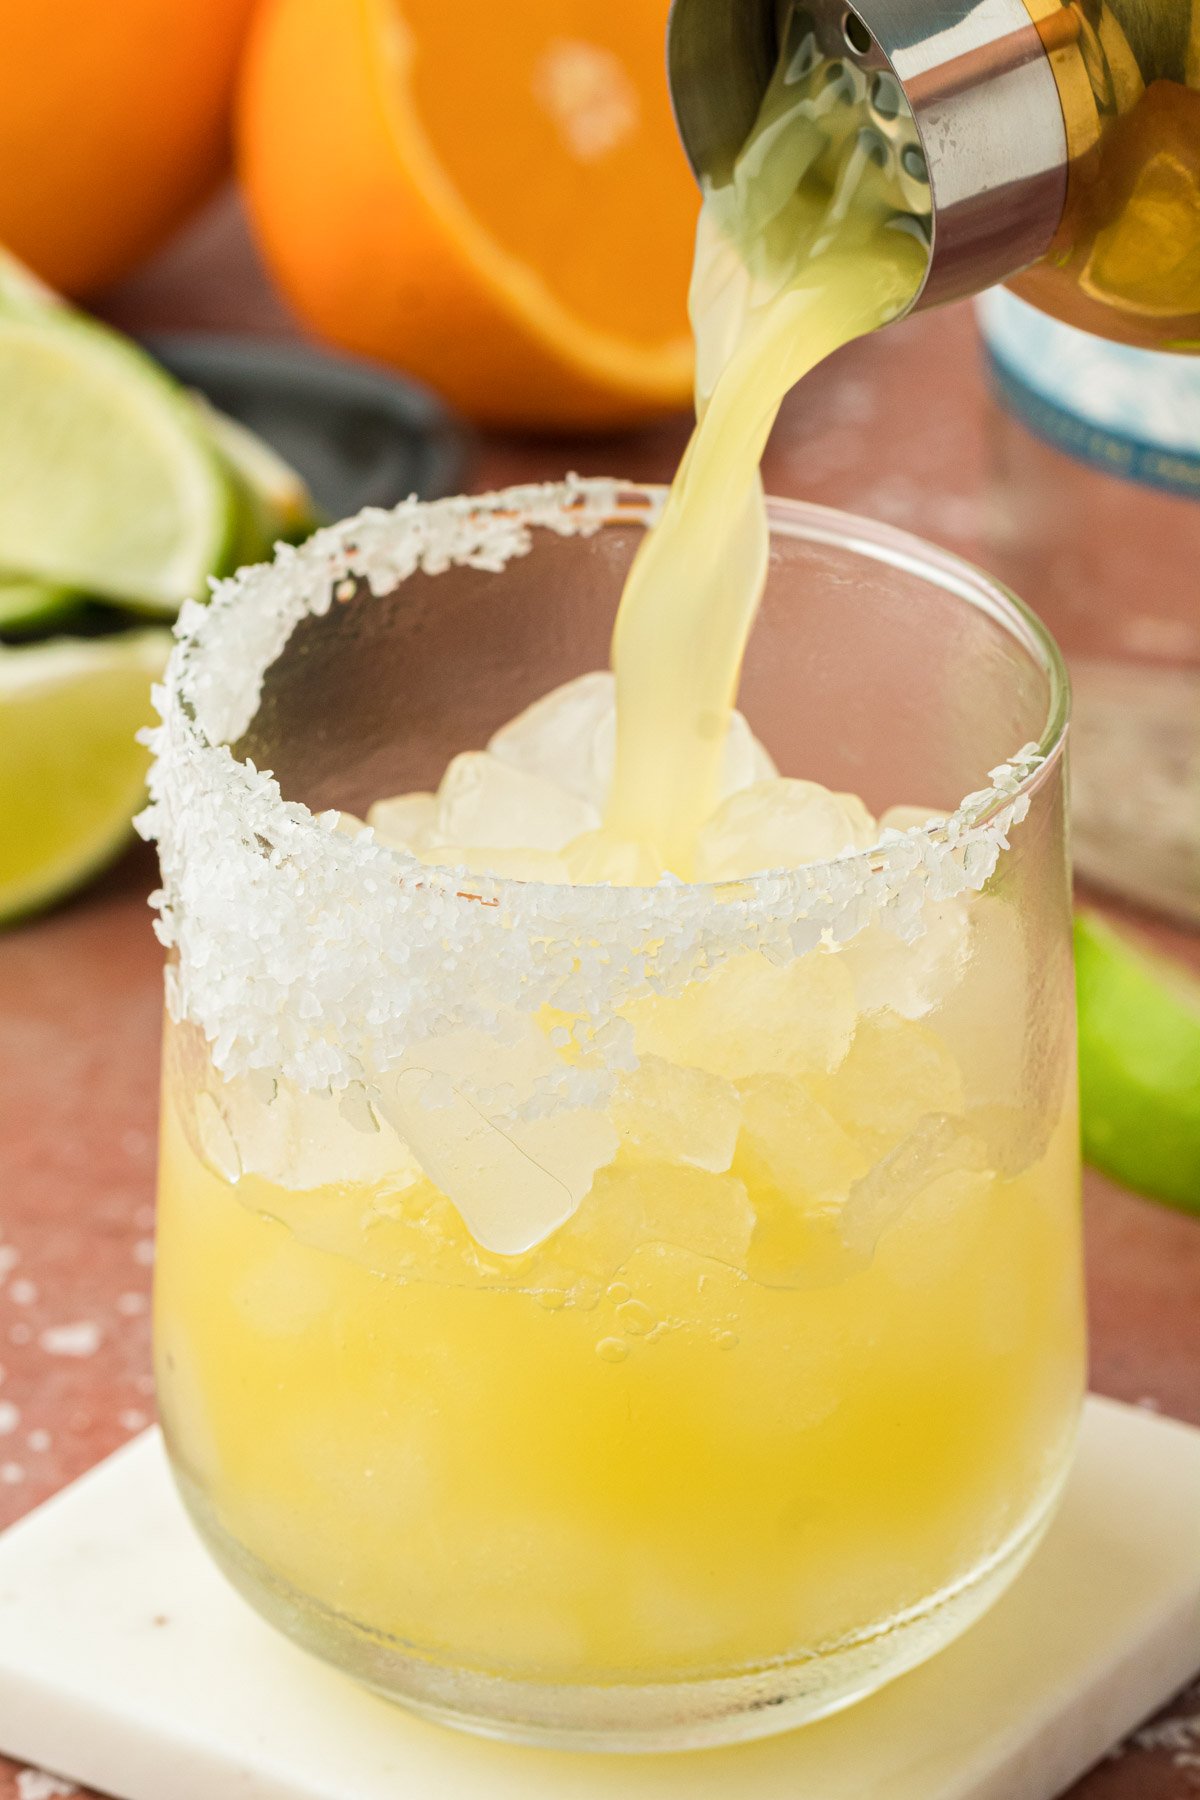 A skinny margarita being strained into a glass from a cocktail shaker.